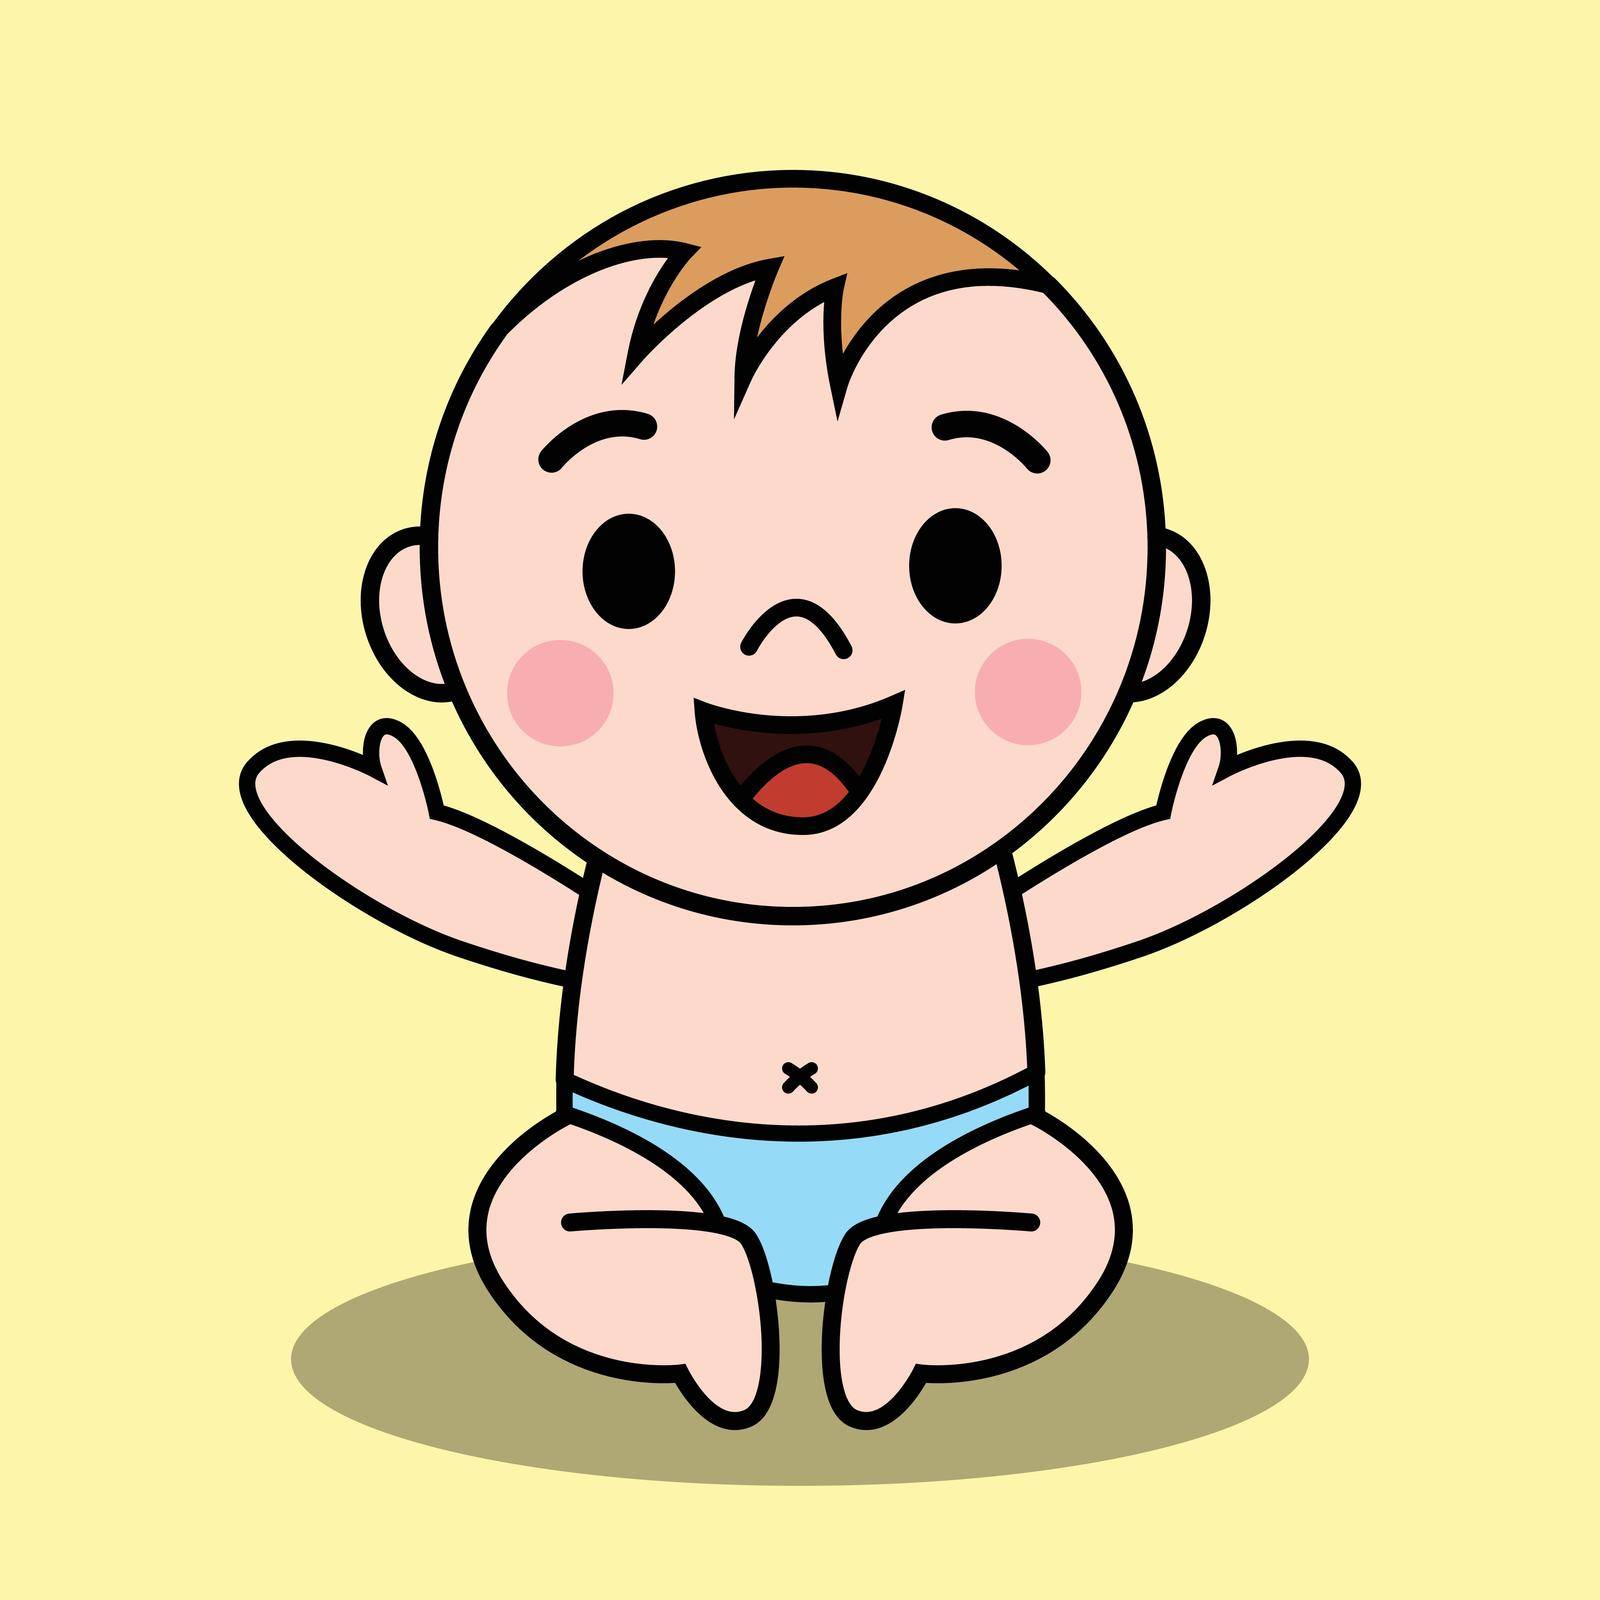 Vector illustration Of a baby. He is sitting and Smiling and open his arms to request to be carry. by Dear_s_Gallery